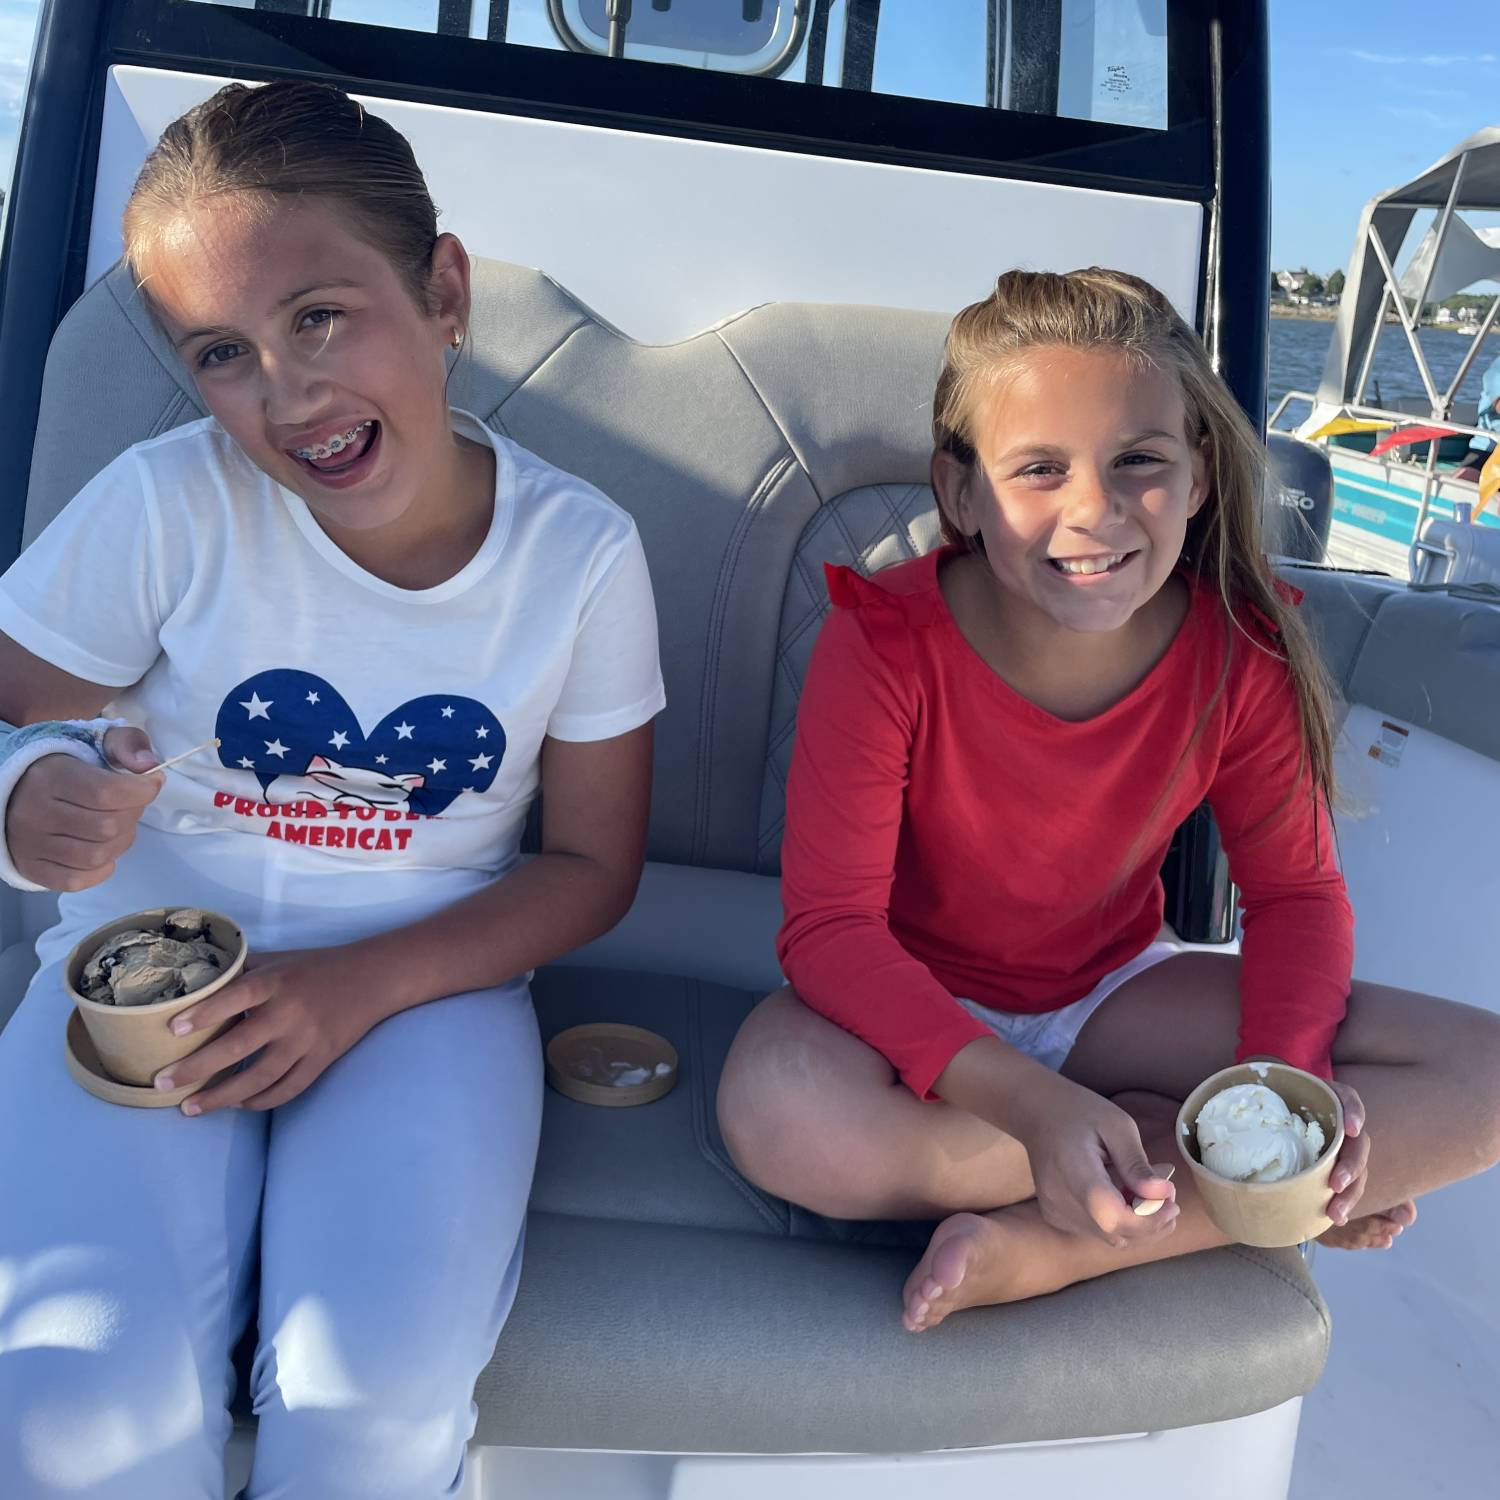 Title: 4th of July on the 302! - On board their Sportsman Open 302 Center Console - Location: Falmouth, MA. Participating in the Photo Contest #SportsmanJuly